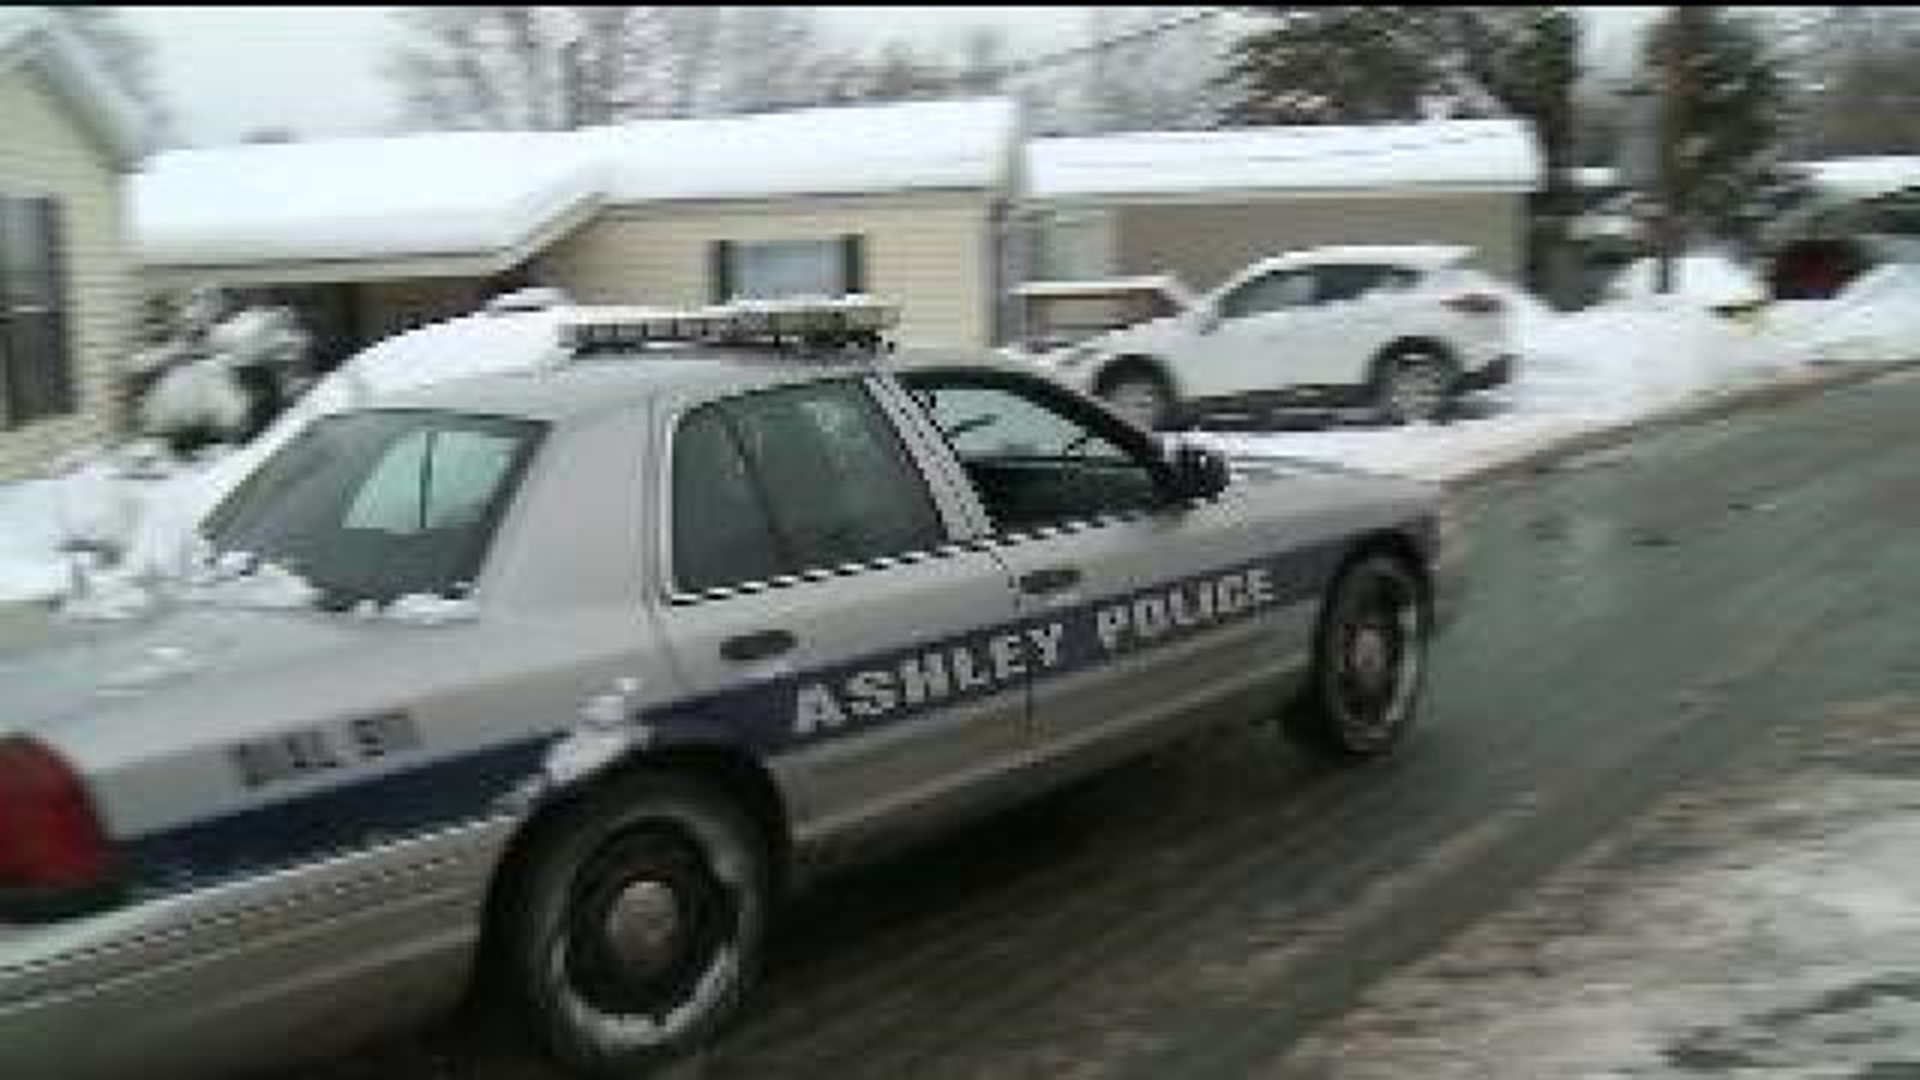 Boy Shoveling Snow Nearly Abducted in Ashley